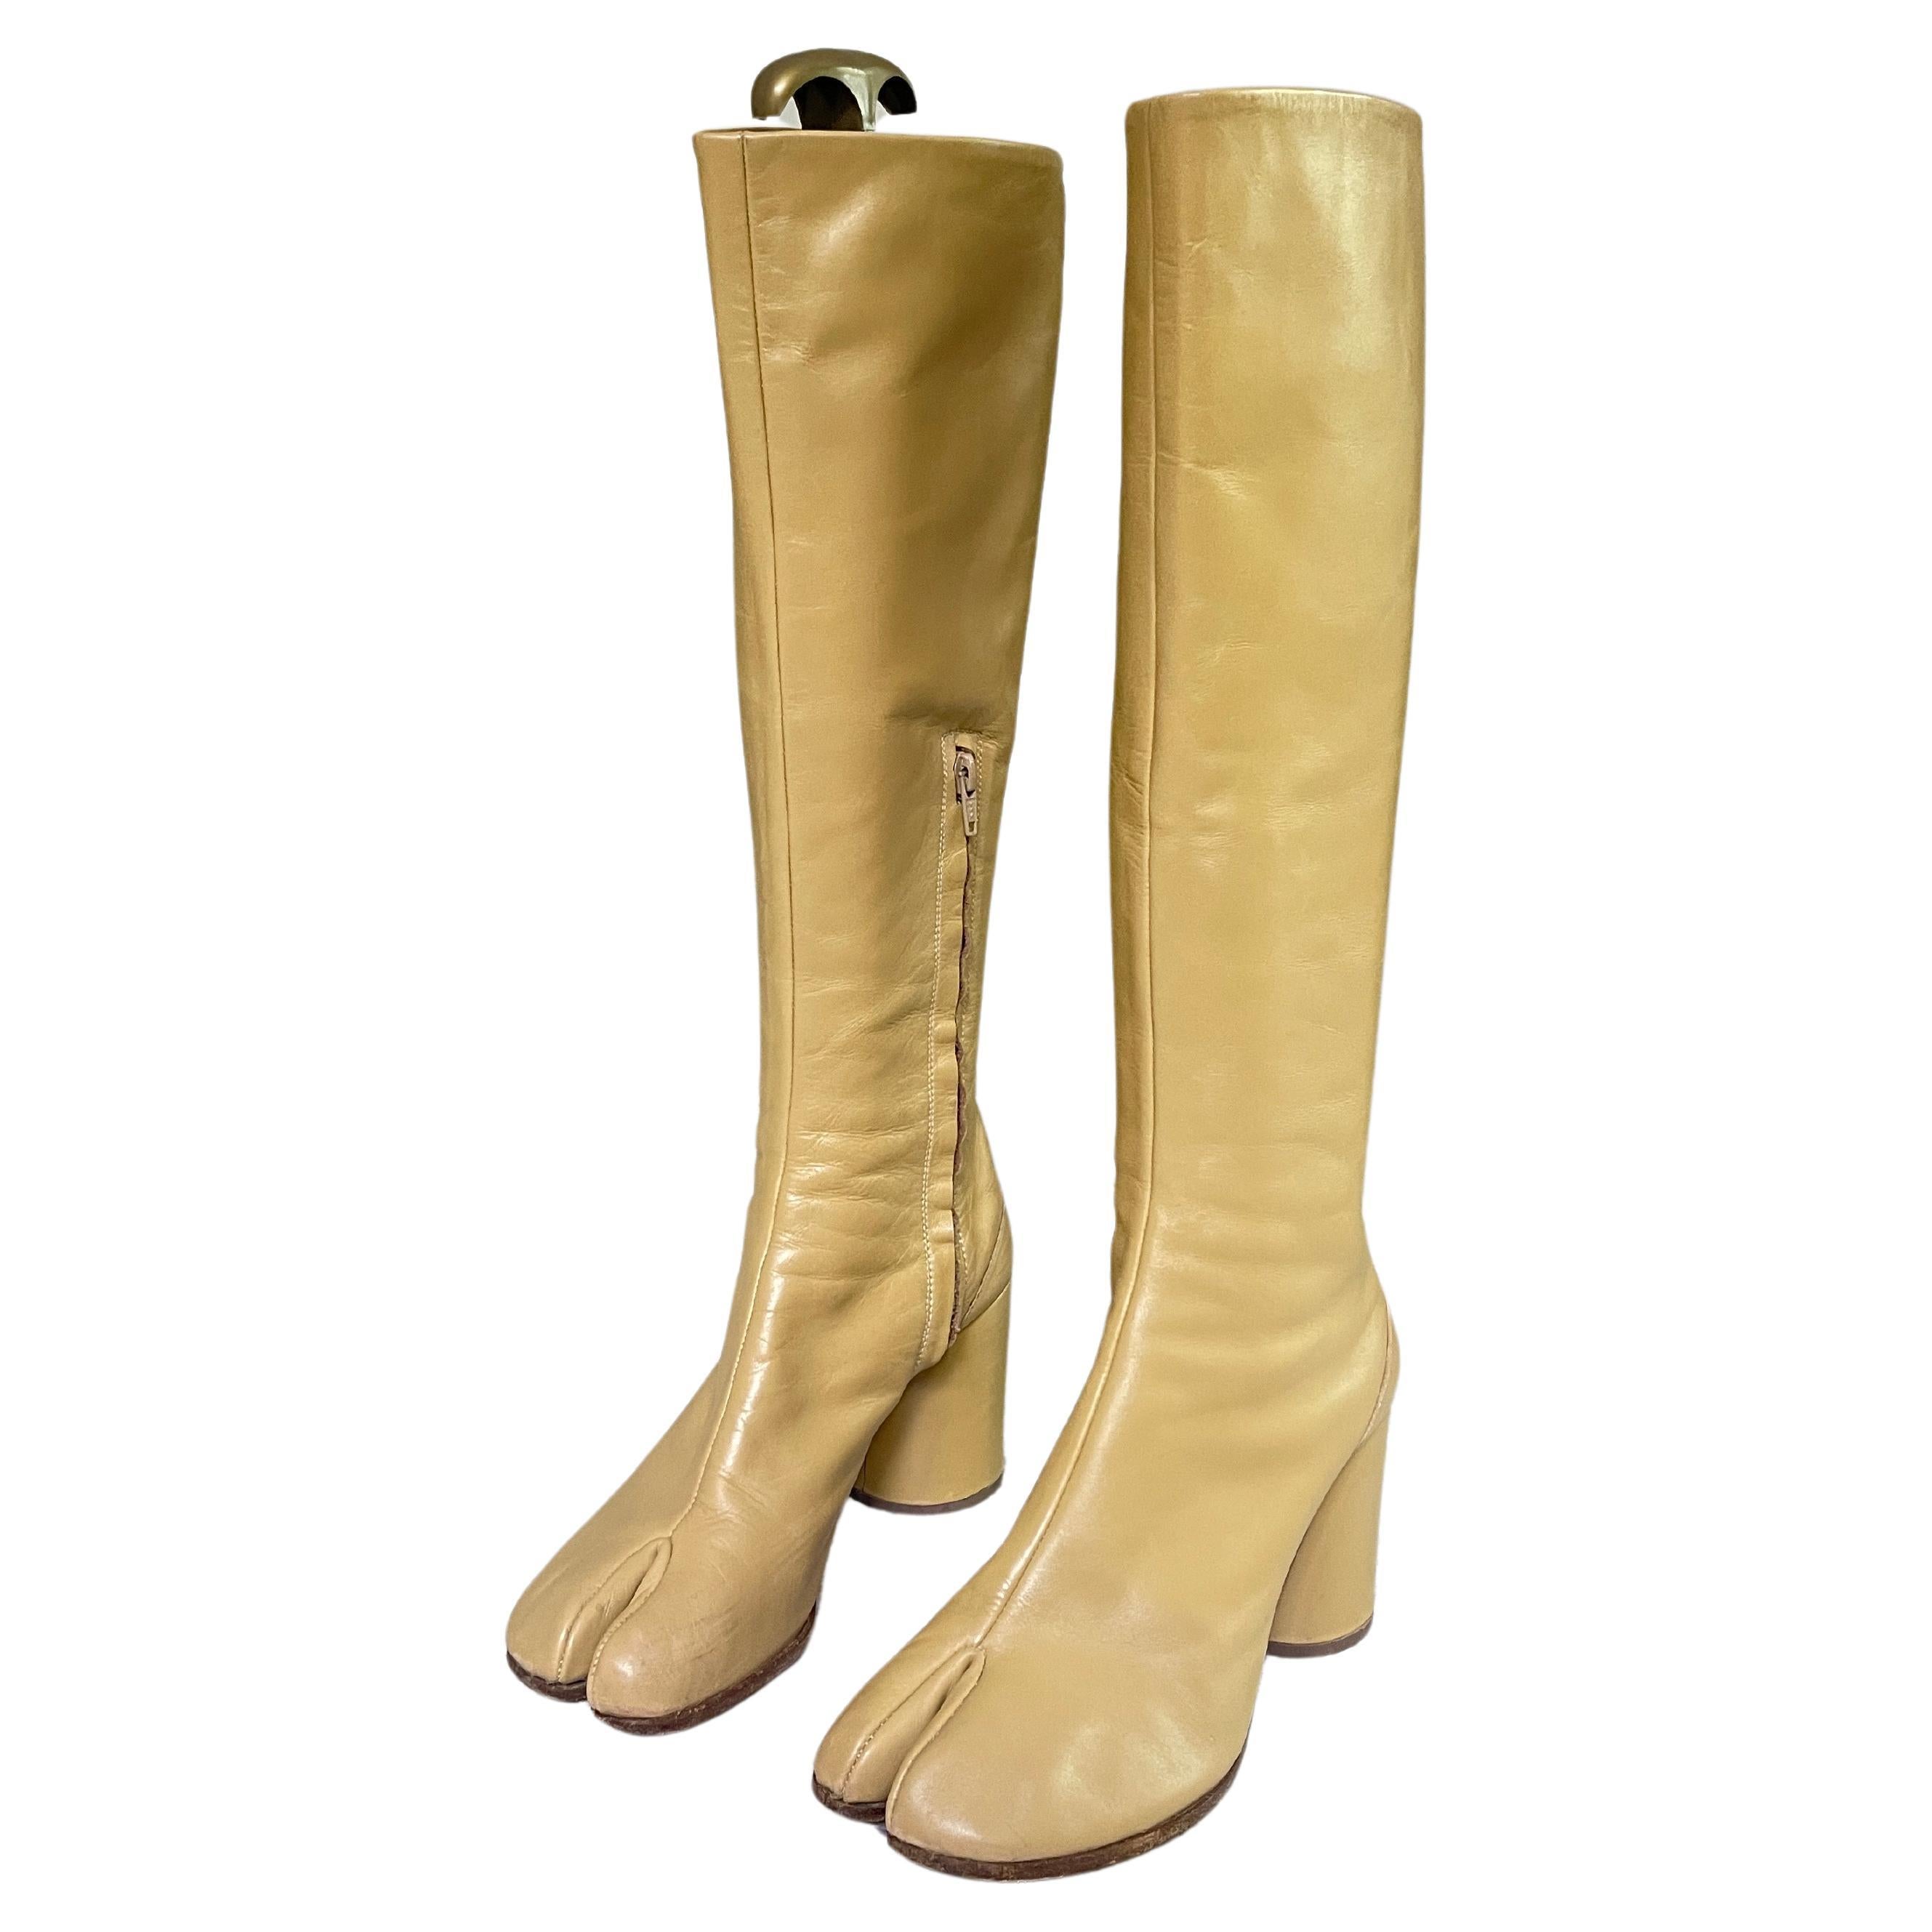 Margiela Tabi Knee High Boots 2004 look book collection  Beige  Leather  EU 38  For Sale